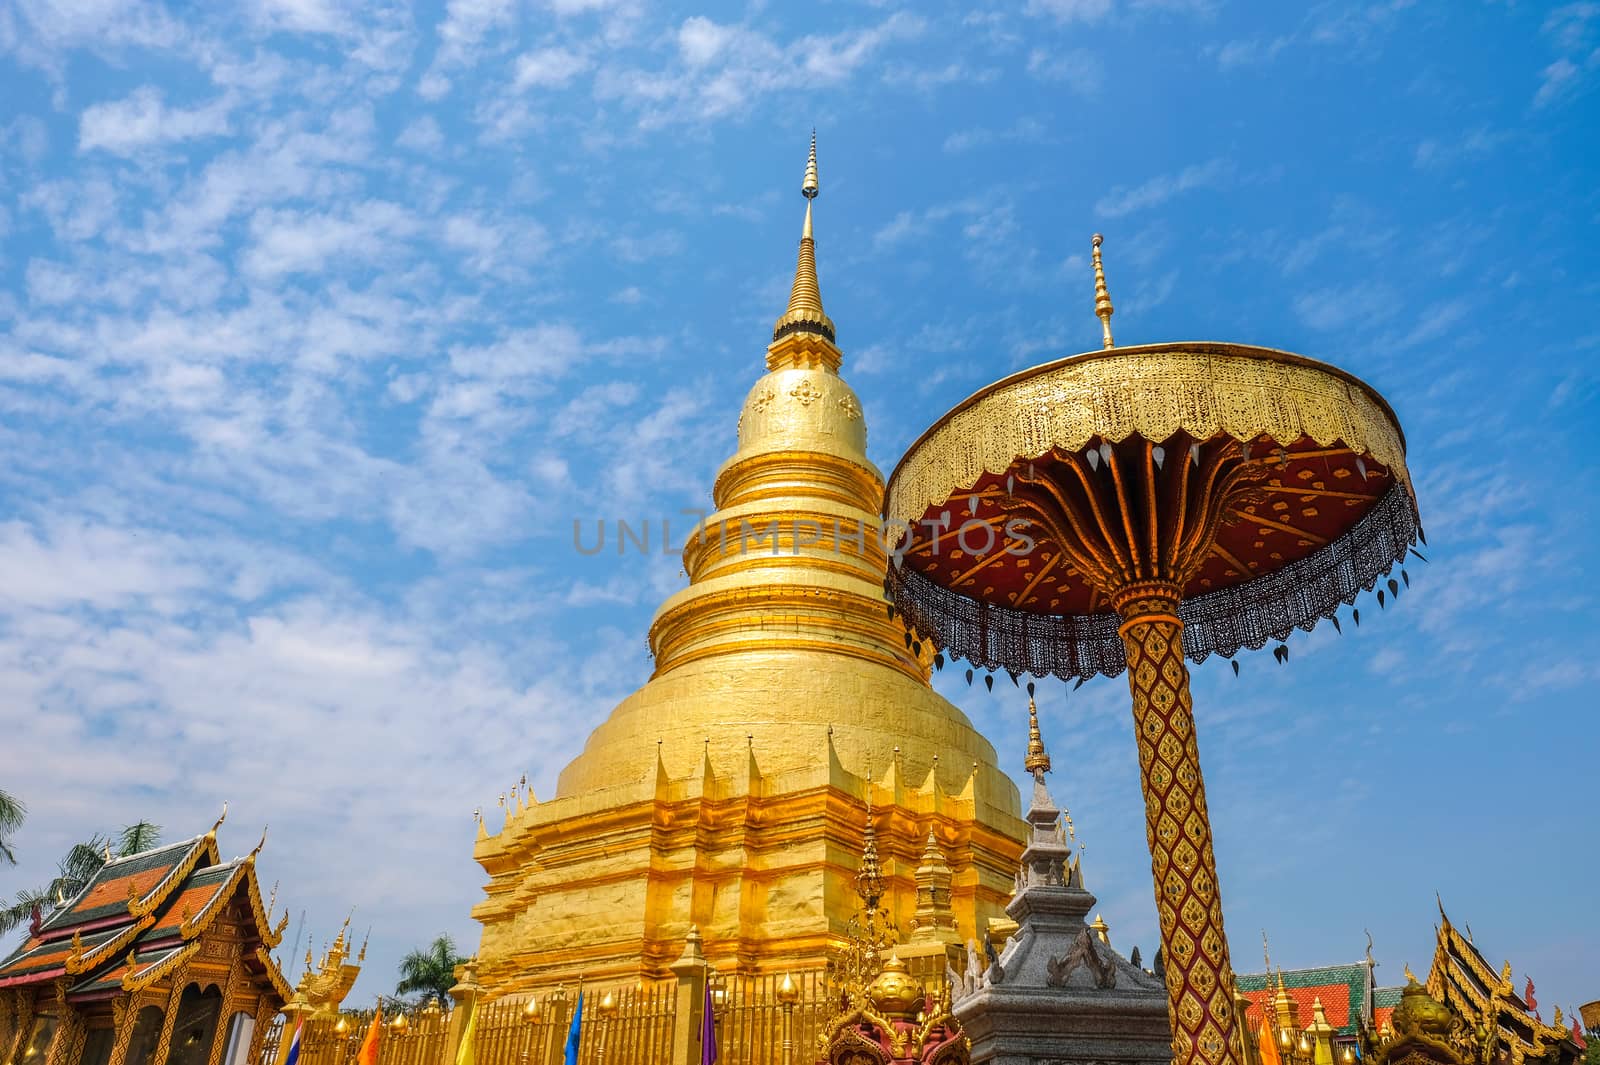 A golden pagoda at Wat Phra That Hariphunchai, the most important buddhist landmark in Lumphun city, Northern Thialand